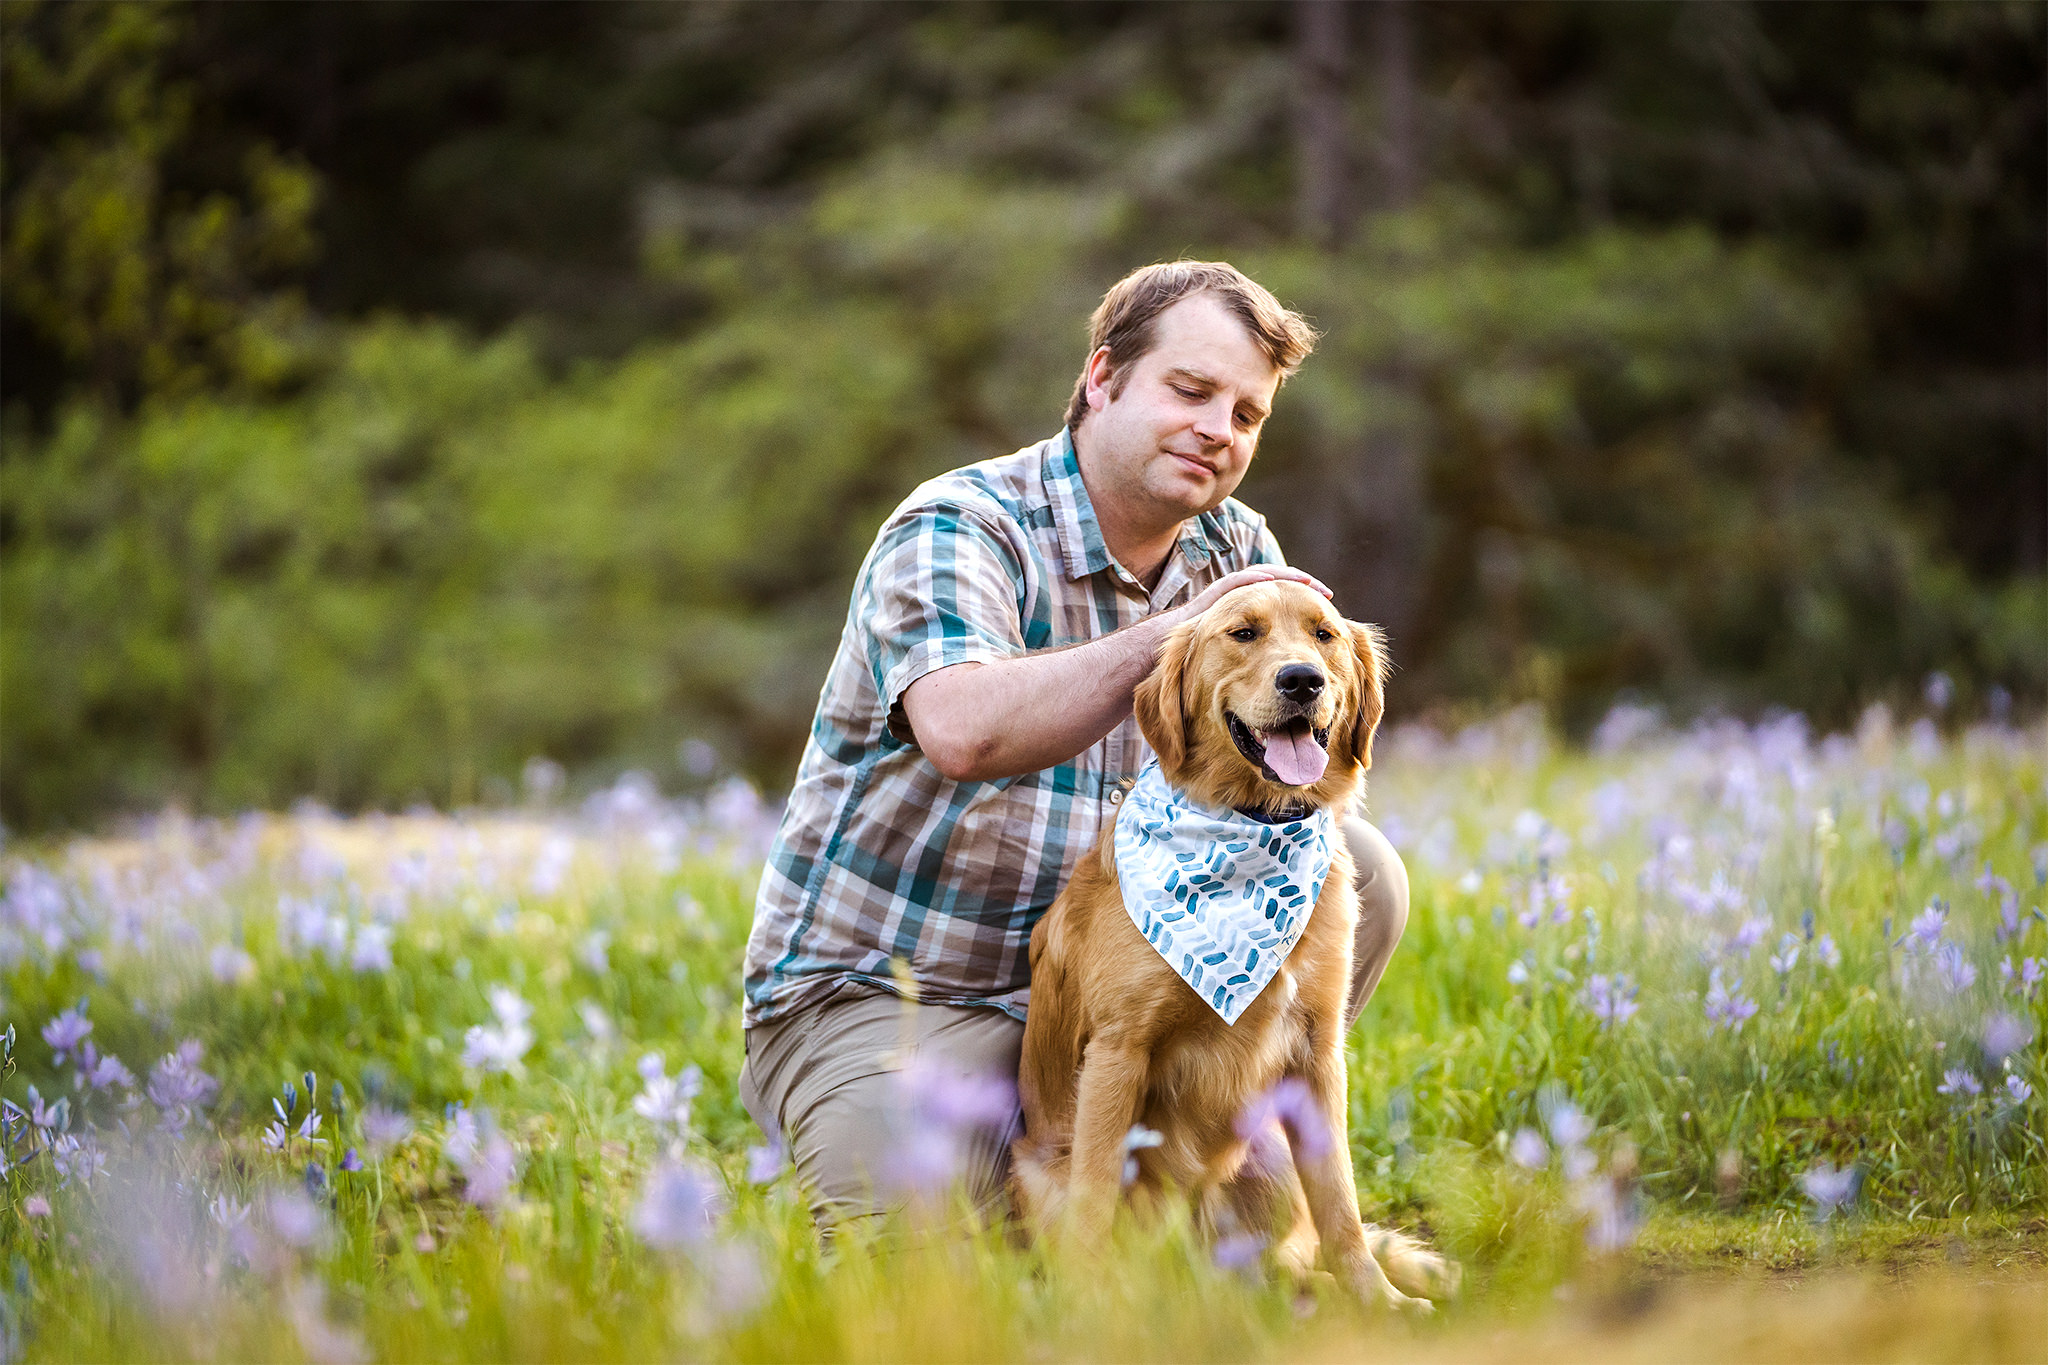 man pets his dog in a field of purple flowers